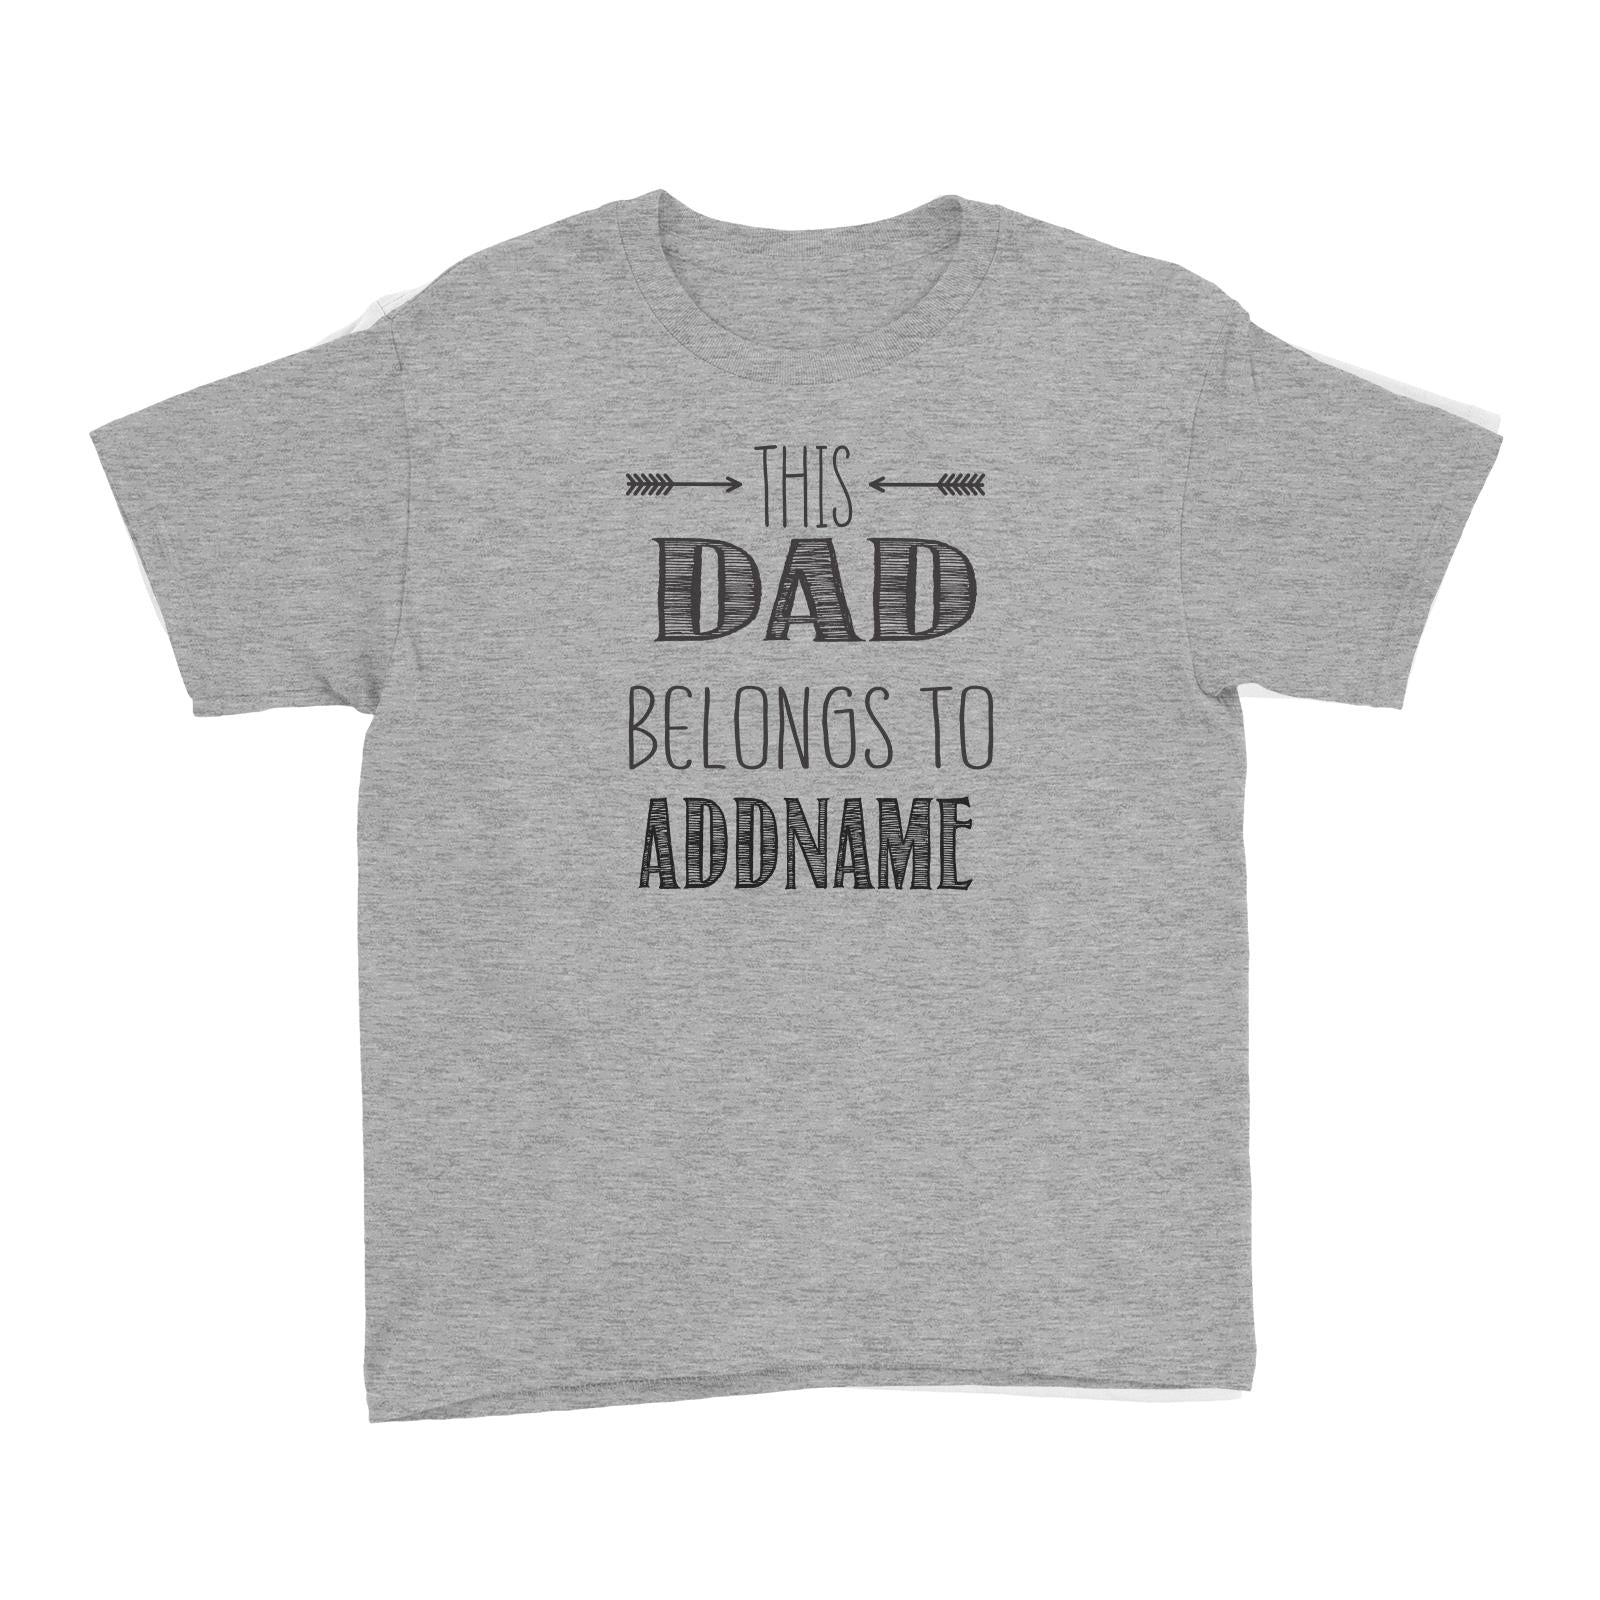 This Dad Belongs to Addname Kid's T-Shirt